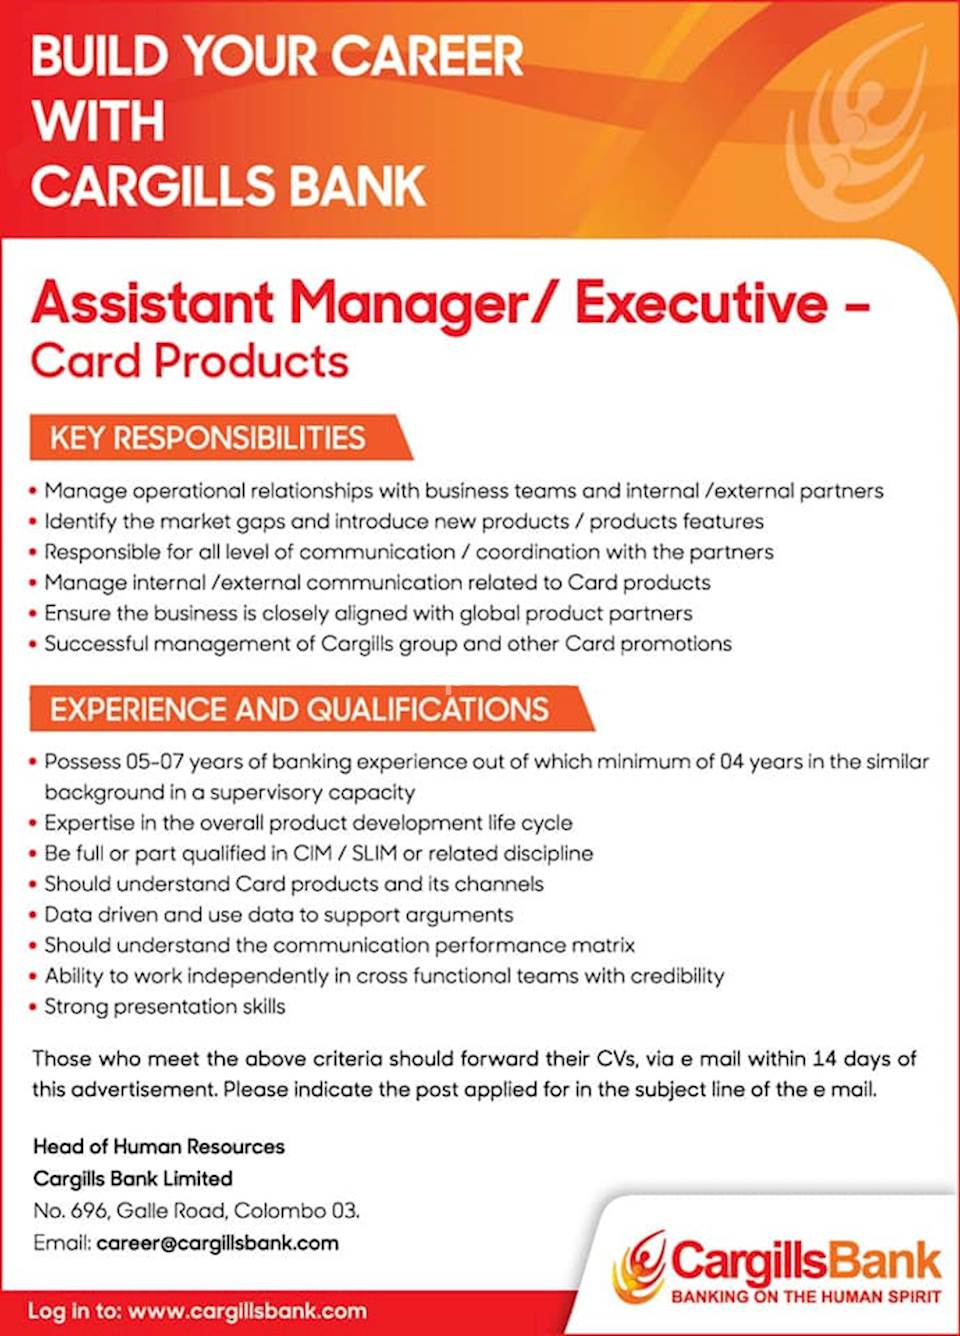 Assistant Manager / Executive - Card Products